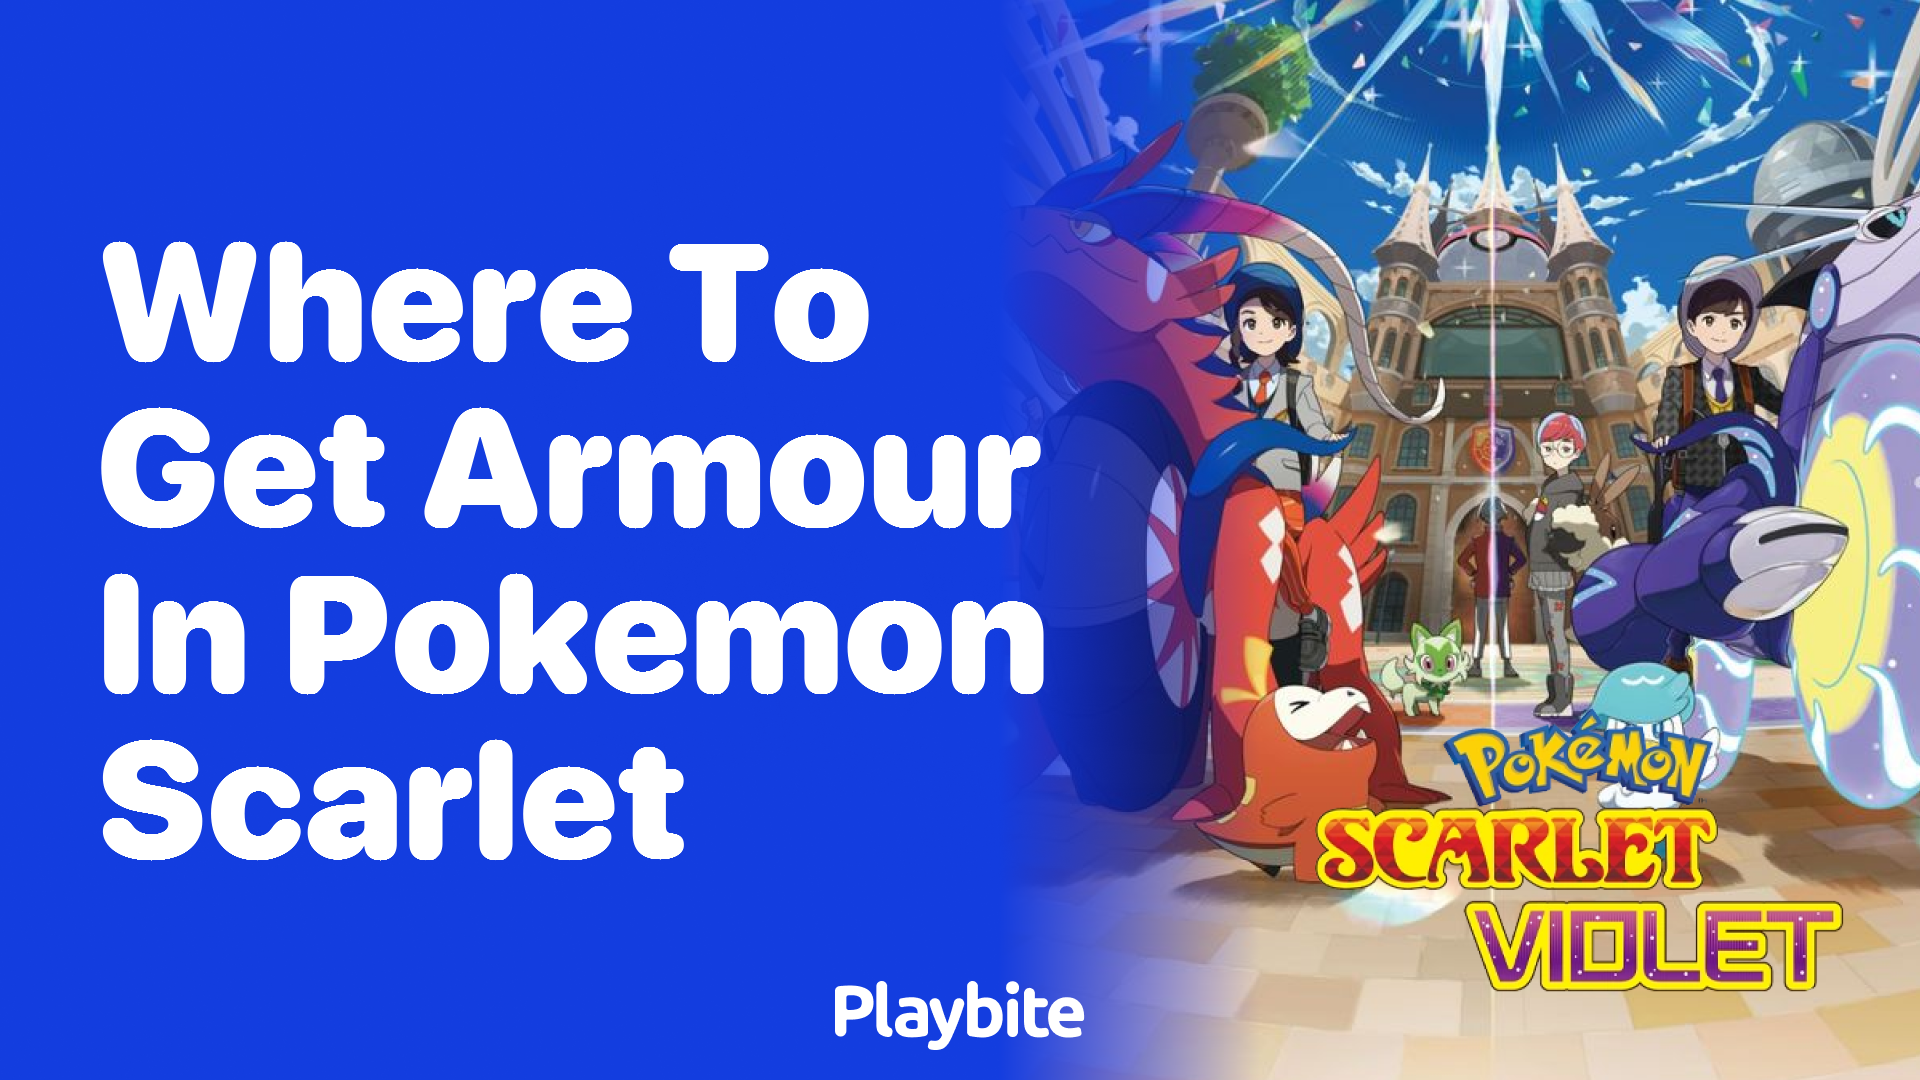 Where to Get Armour in Pokemon Scarlet